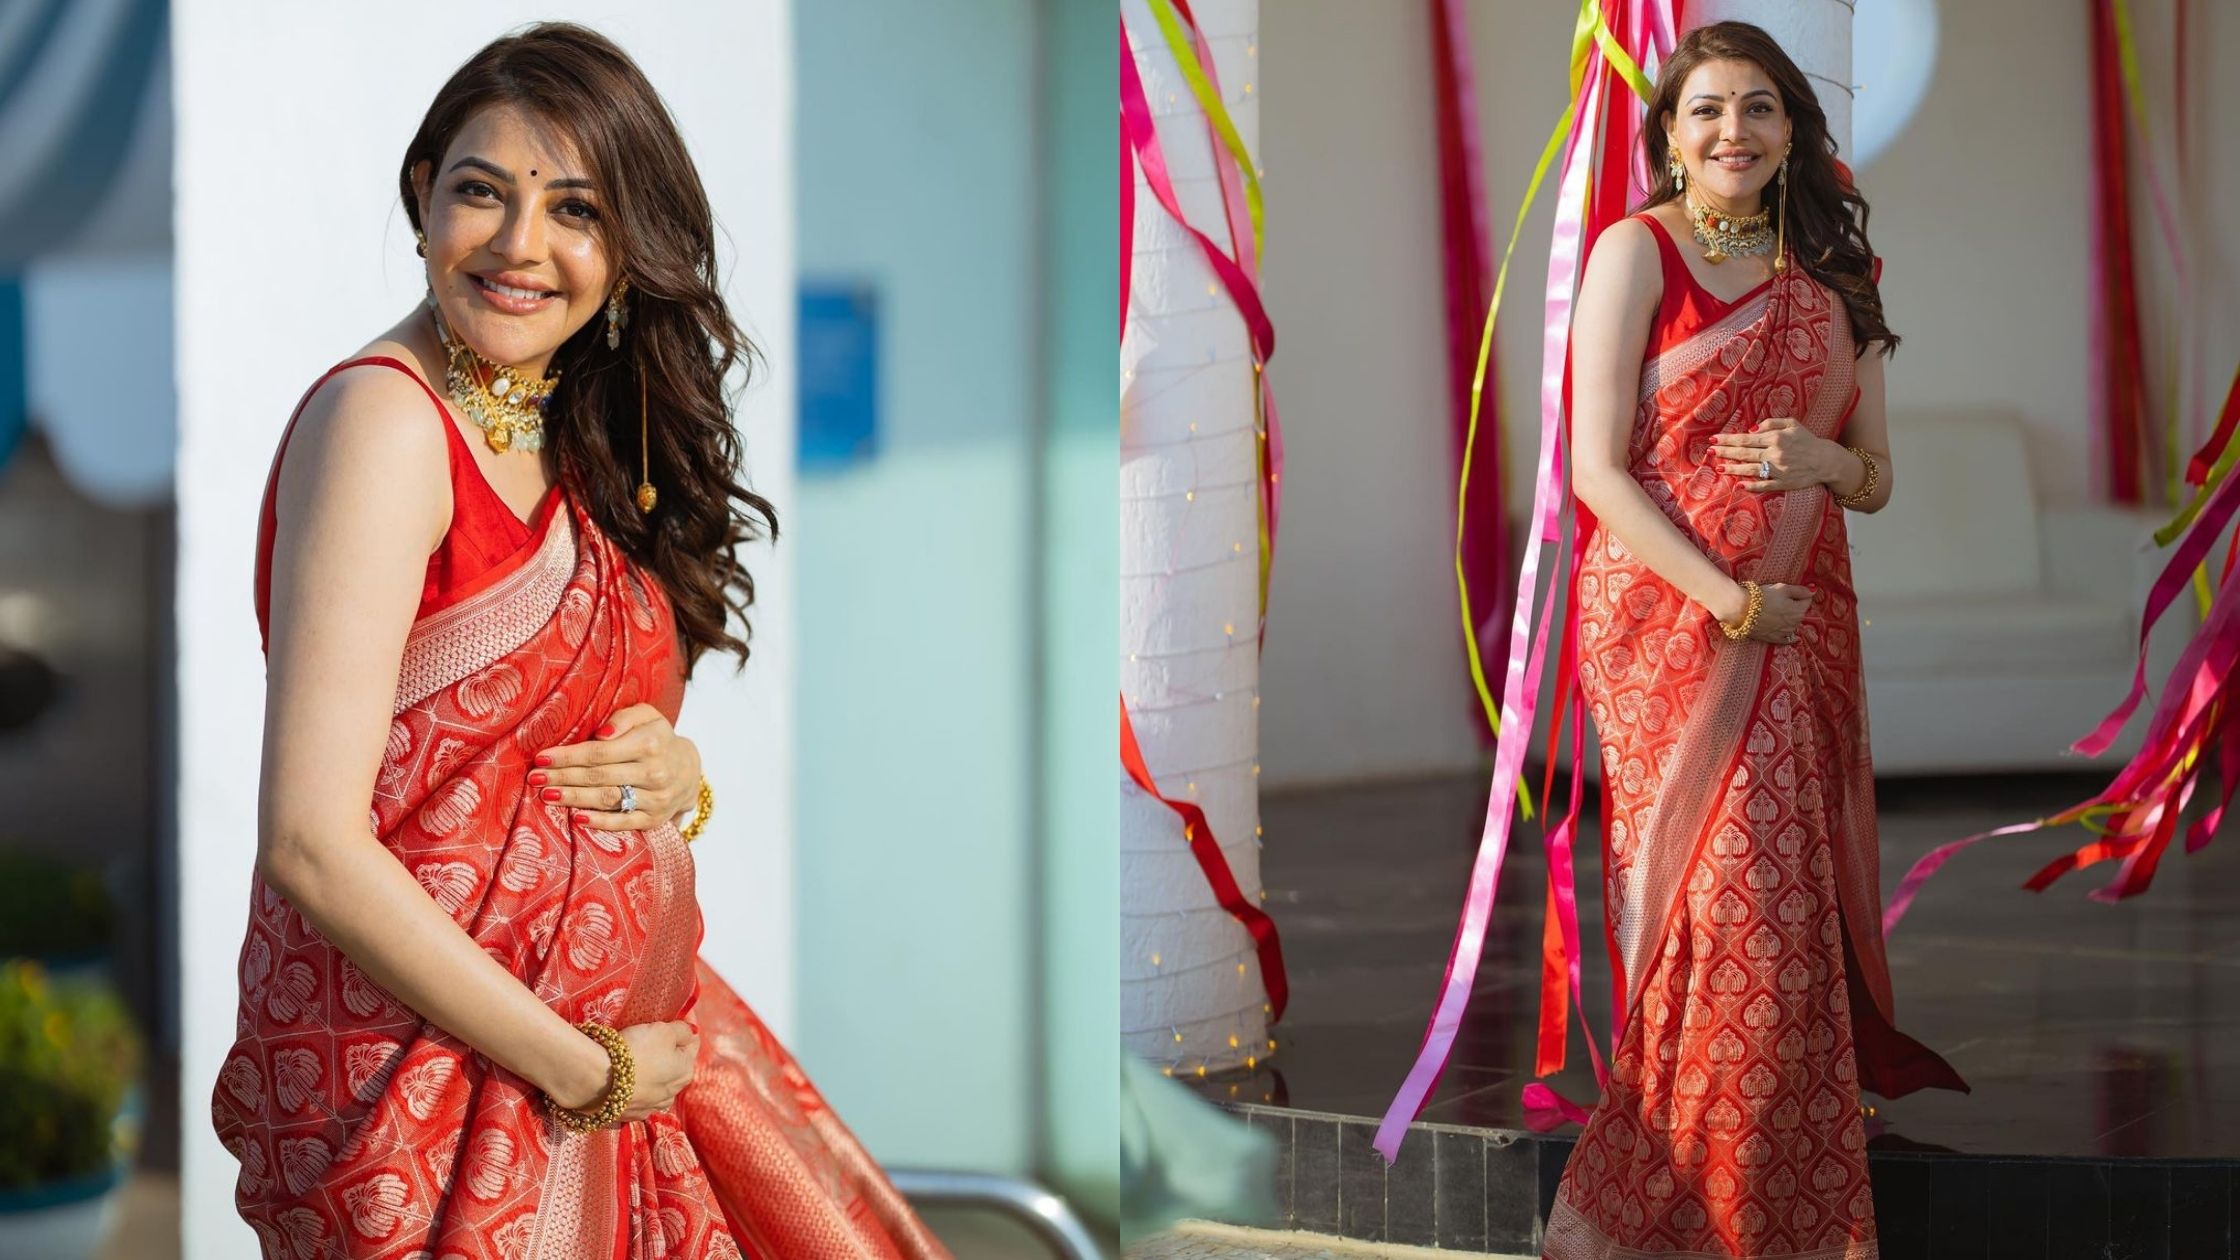 Kajal Aggarwal Loves Doing Pilates And Exercising Even During Her Pregnancy